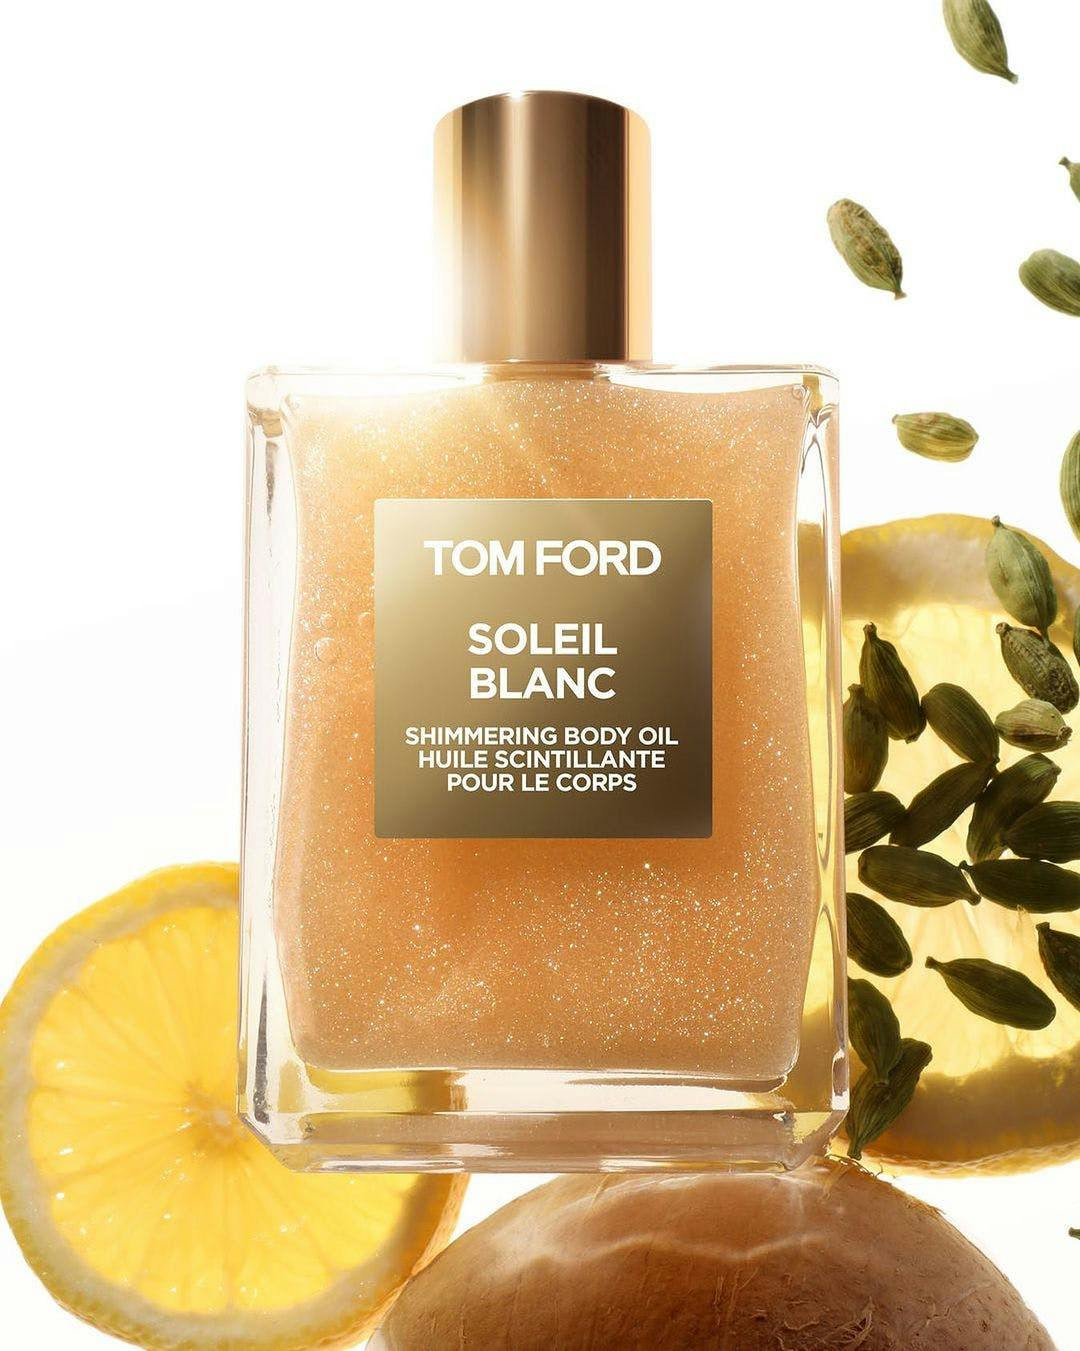 All photos courtesy of Tom Ford @tomfordbeauty